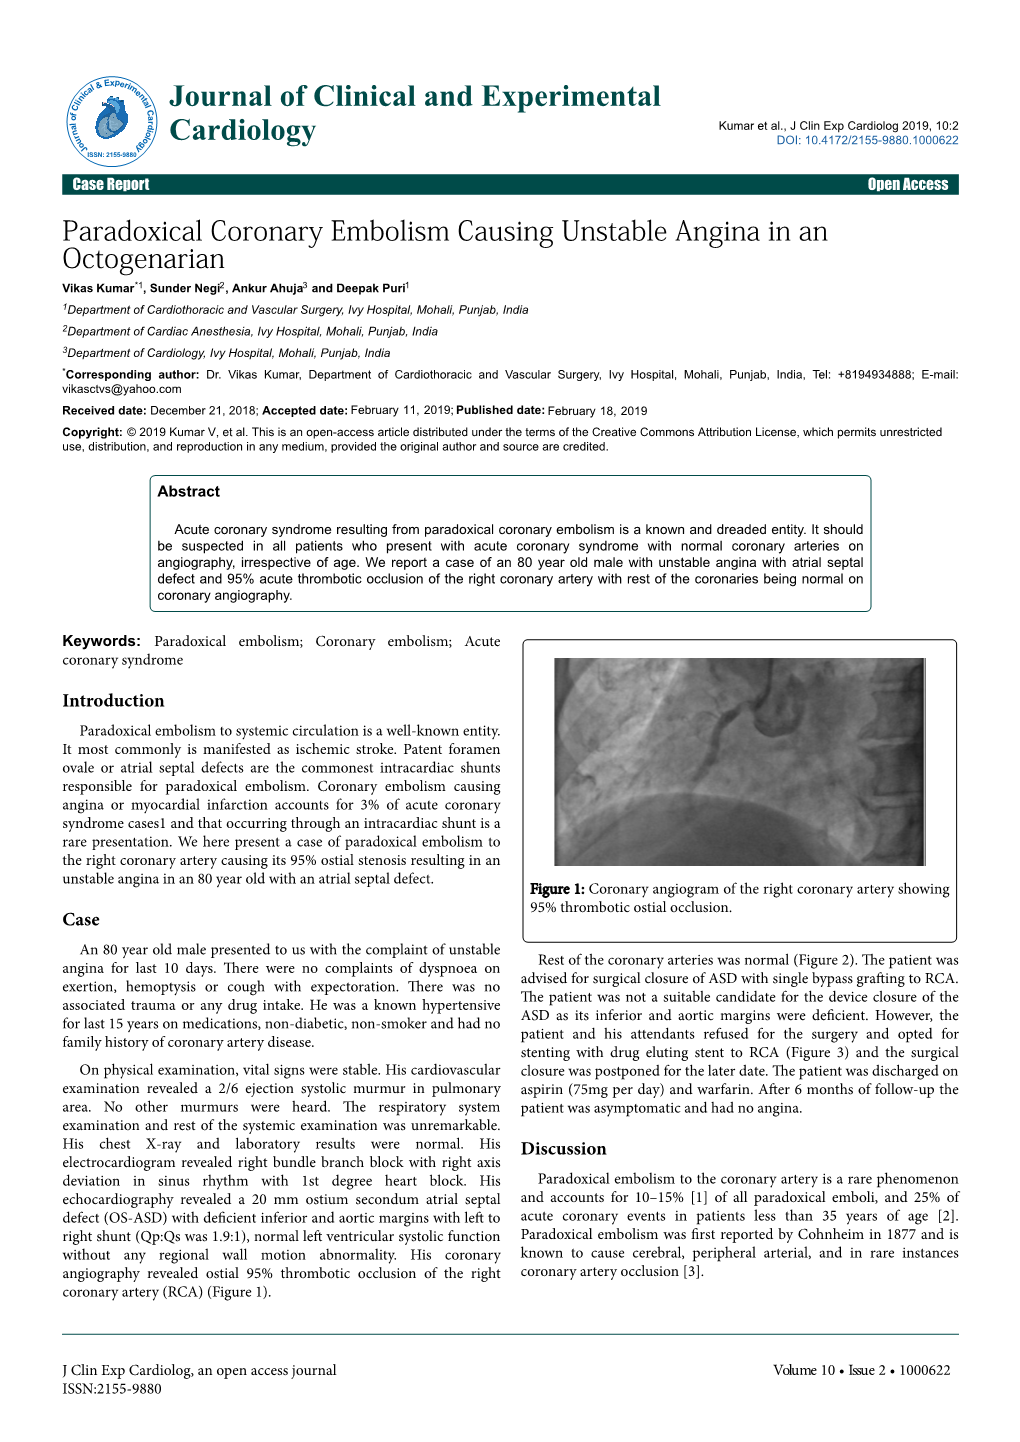 Paradoxical Coronary Embolism Causing Unstable Angina in An